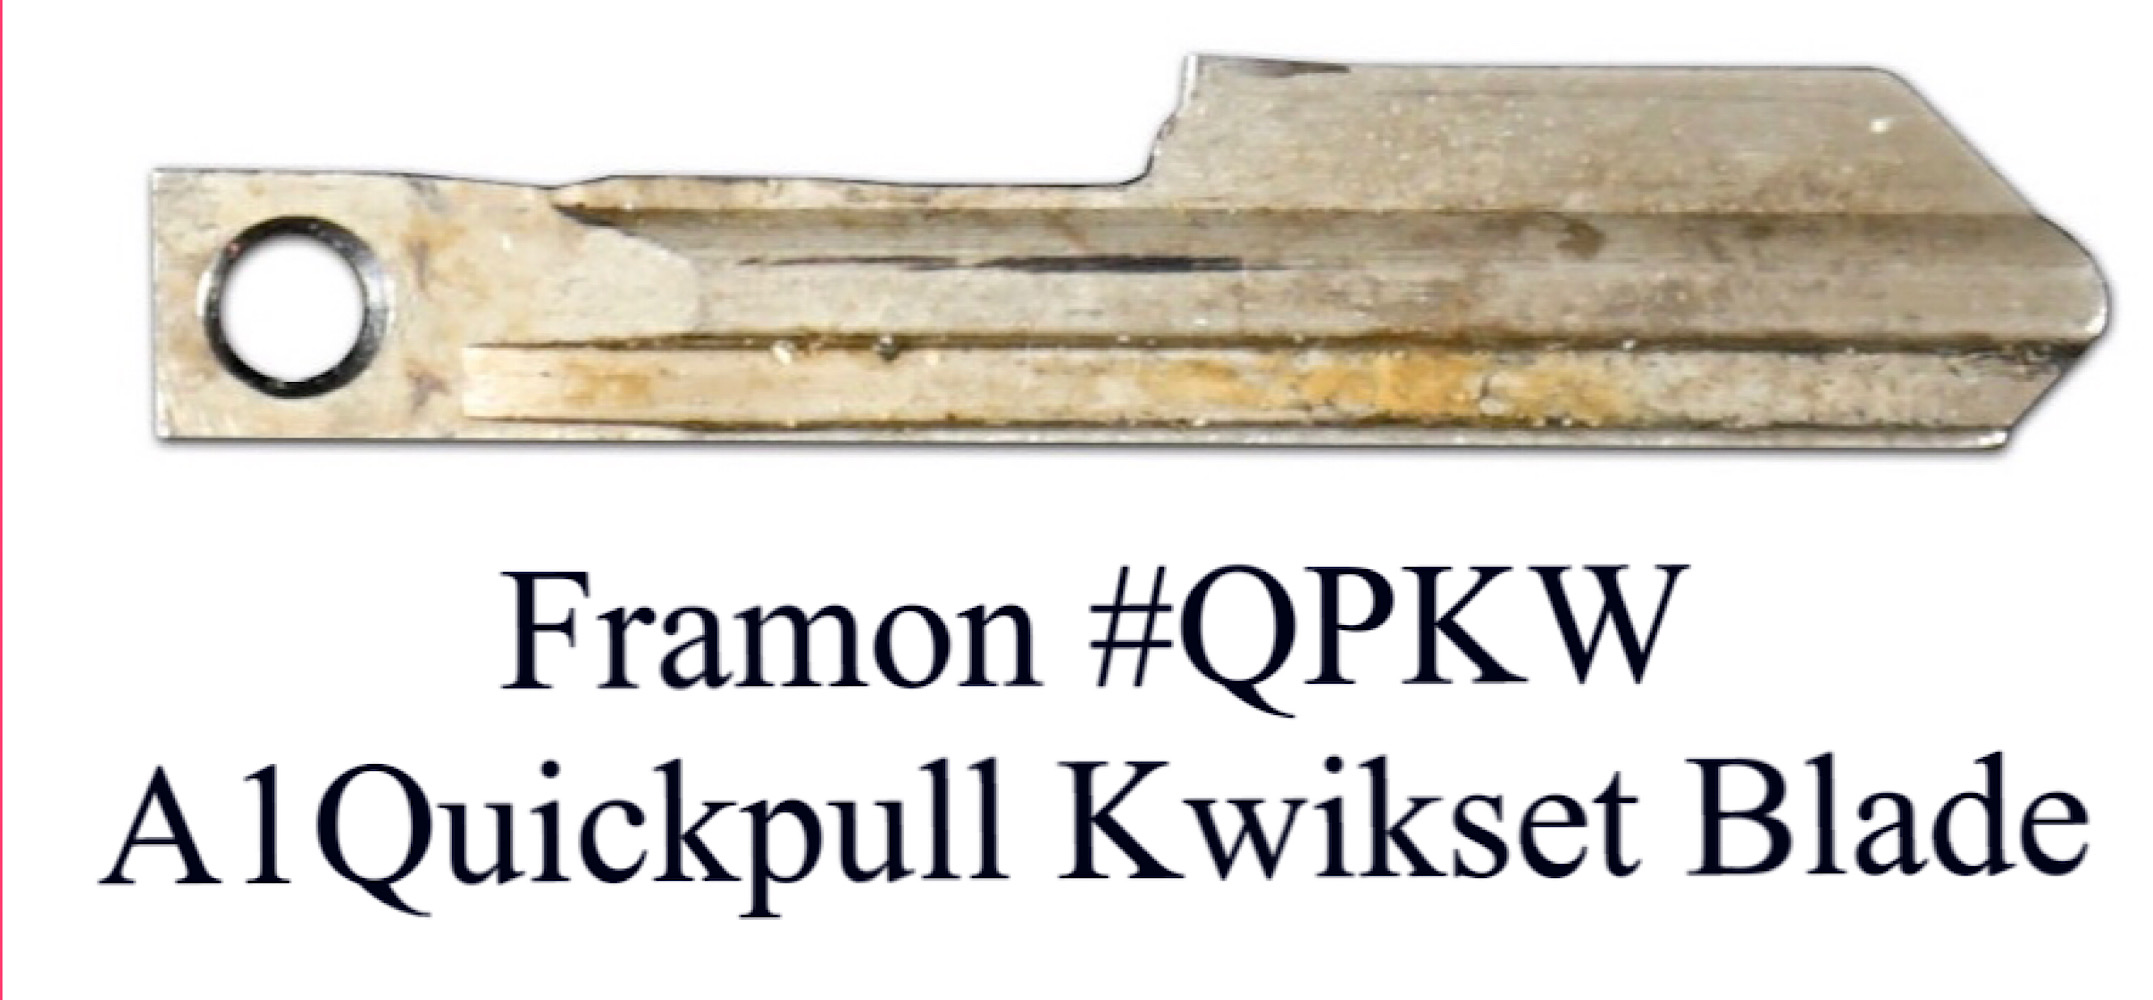 New: Framon replacement blade for A1 Quickpull Kwikset